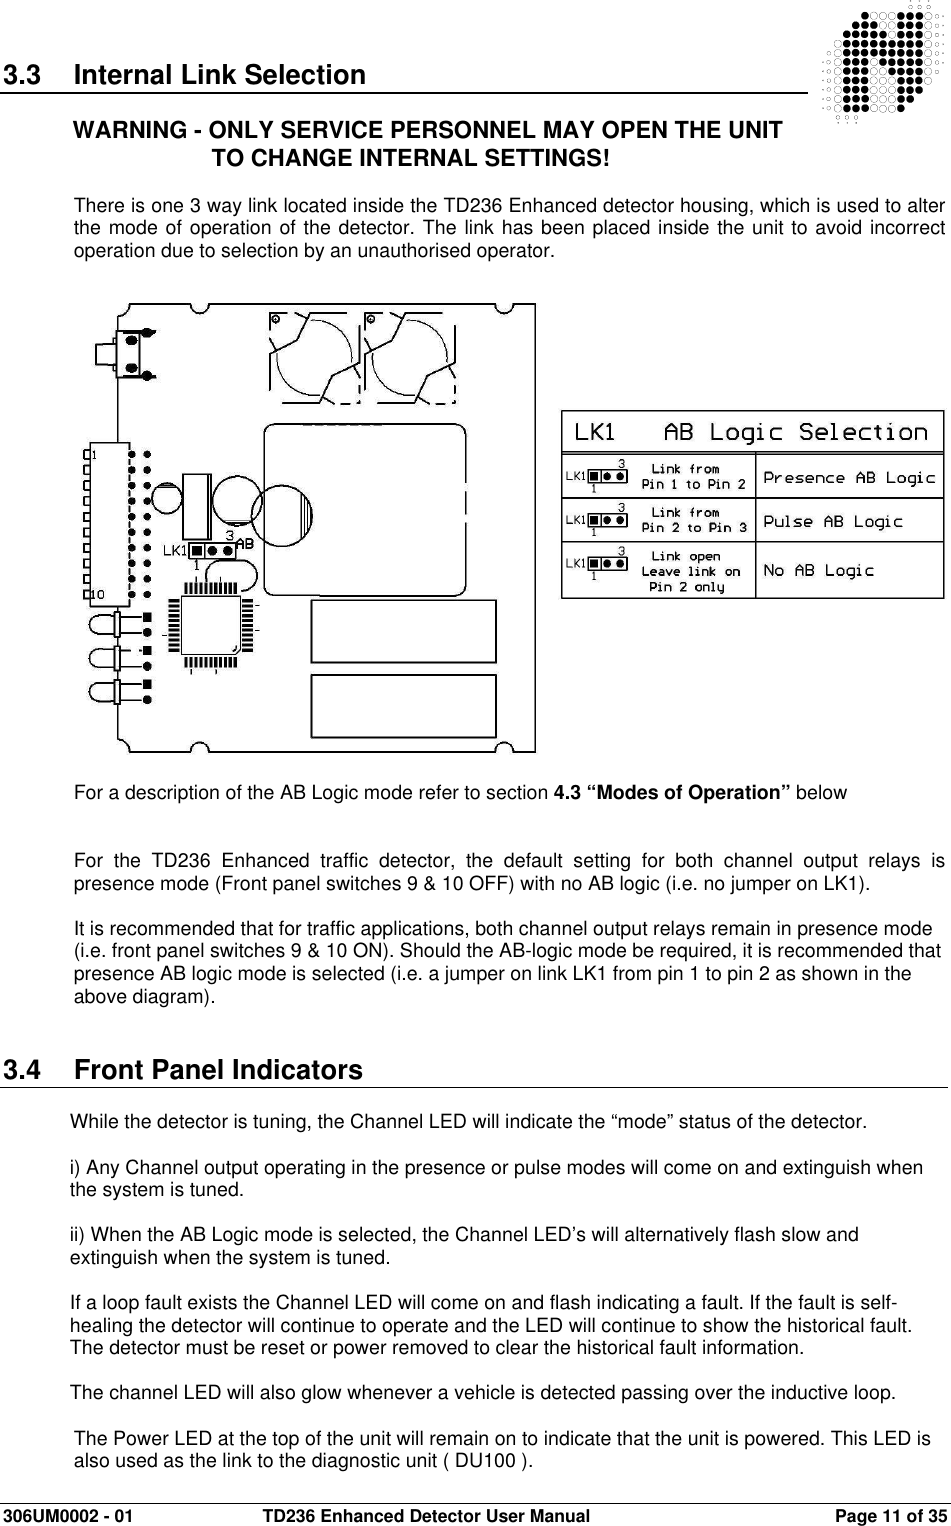  306UM0002 - 01  TD236 Enhanced Detector User Manual   Page 11 of 35  3.3  Internal Link Selection  WARNING - ONLY SERVICE PERSONNEL MAY OPEN THE UNIT TO CHANGE INTERNAL SETTINGS!  There is one 3 way link located inside the TD236 Enhanced detector housing, which is used to alter the mode of operation of the detector. The link has been placed inside the unit to avoid incorrect operation due to selection by an unauthorised operator.                        For a description of the AB Logic mode refer to section 4.3 “Modes of Operation” below   For  the  TD236  Enhanced  traffic  detector,  the  default  setting  for  both  channel  output  relays  is presence mode (Front panel switches 9 &amp; 10 OFF) with no AB logic (i.e. no jumper on LK1).  It is recommended that for traffic applications, both channel output relays remain in presence mode (i.e. front panel switches 9 &amp; 10 ON). Should the AB-logic mode be required, it is recommended that presence AB logic mode is selected (i.e. a jumper on link LK1 from pin 1 to pin 2 as shown in the above diagram).    3.4  Front Panel Indicators  While the detector is tuning, the Channel LED will indicate the “mode” status of the detector.  i) Any Channel output operating in the presence or pulse modes will come on and extinguish when the system is tuned.  ii) When the AB Logic mode is selected, the Channel LED’s will alternatively flash slow and extinguish when the system is tuned.  If a loop fault exists the Channel LED will come on and flash indicating a fault. If the fault is self-healing the detector will continue to operate and the LED will continue to show the historical fault. The detector must be reset or power removed to clear the historical fault information.  The channel LED will also glow whenever a vehicle is detected passing over the inductive loop.  The Power LED at the top of the unit will remain on to indicate that the unit is powered. This LED is also used as the link to the diagnostic unit ( DU100 ). 